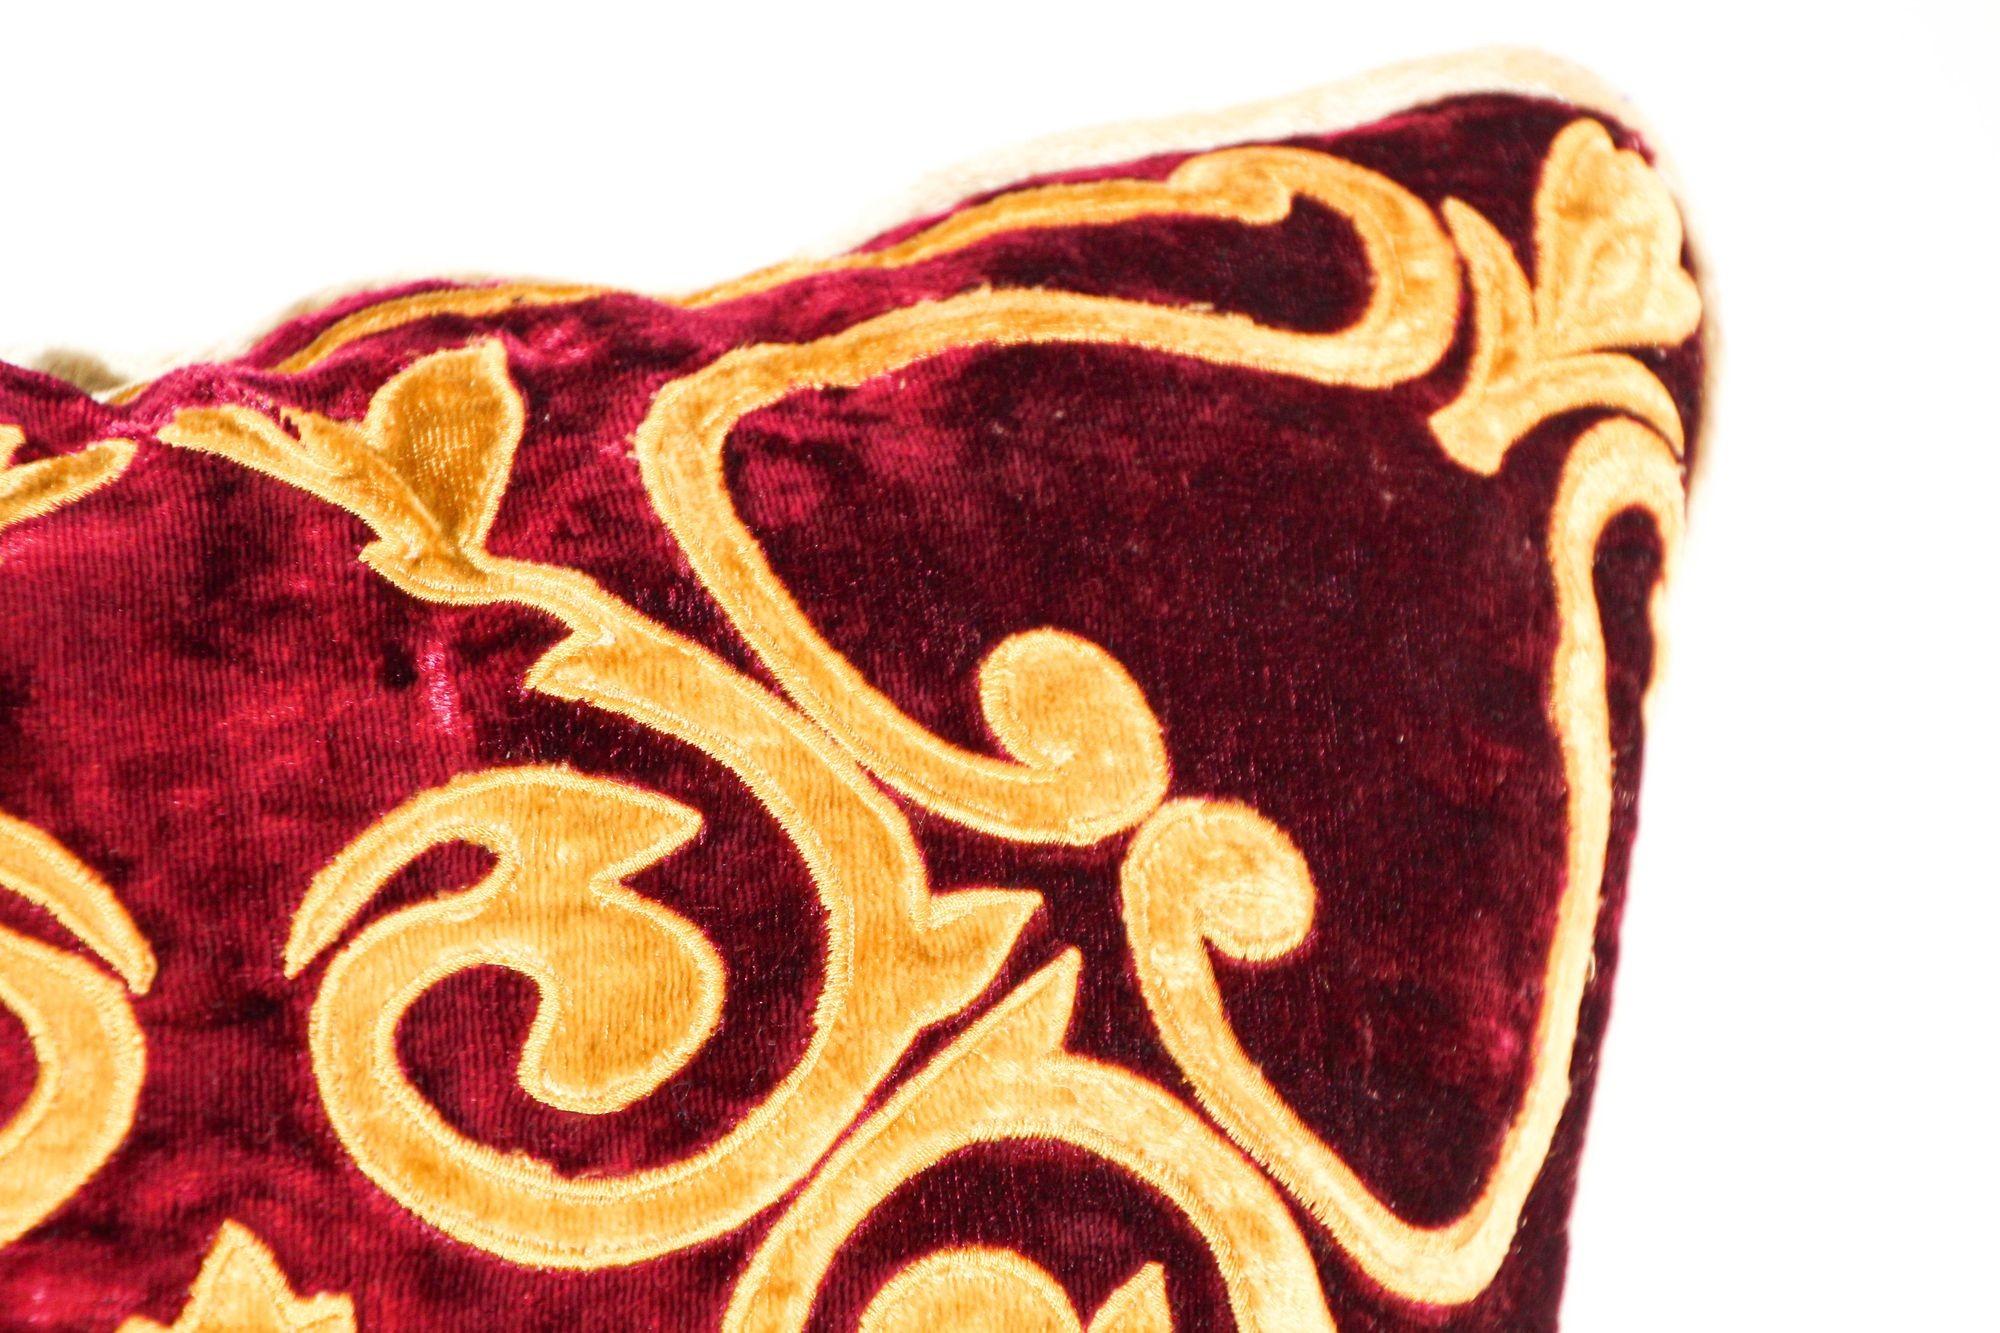 Appliqué Venetian Baroque Red and Gold Velvet Pillows with Elaborate Applique Work a Pair For Sale